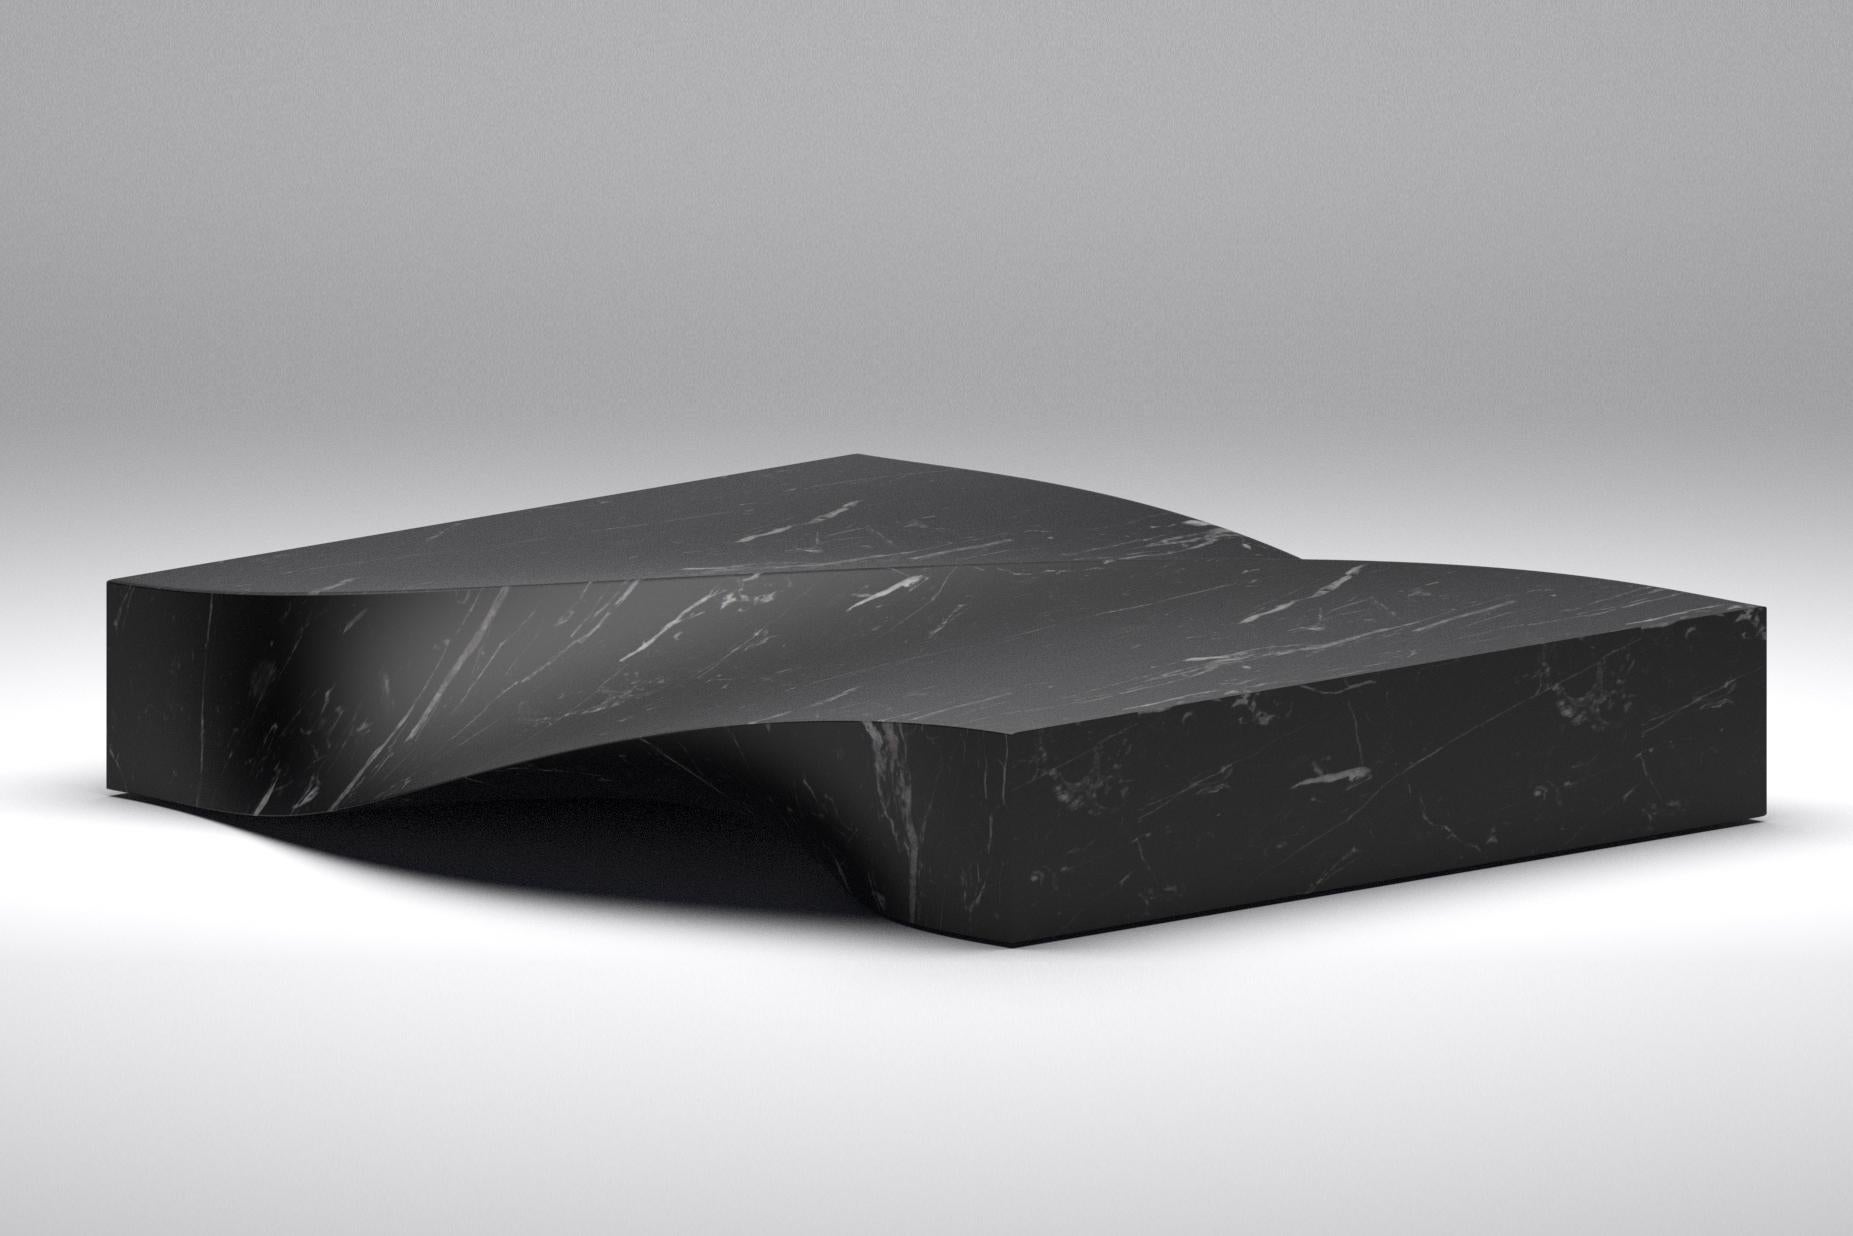 Soul sculpture black coffee table by Veronica Mar
Dimensions: D150 x W80 x H30 cm.
Materials: marble green/white Macael.

Soul sculpture coffee table is available in from 1,5 meters up to 3 meters long. 

Inspired by the spiral movement can be